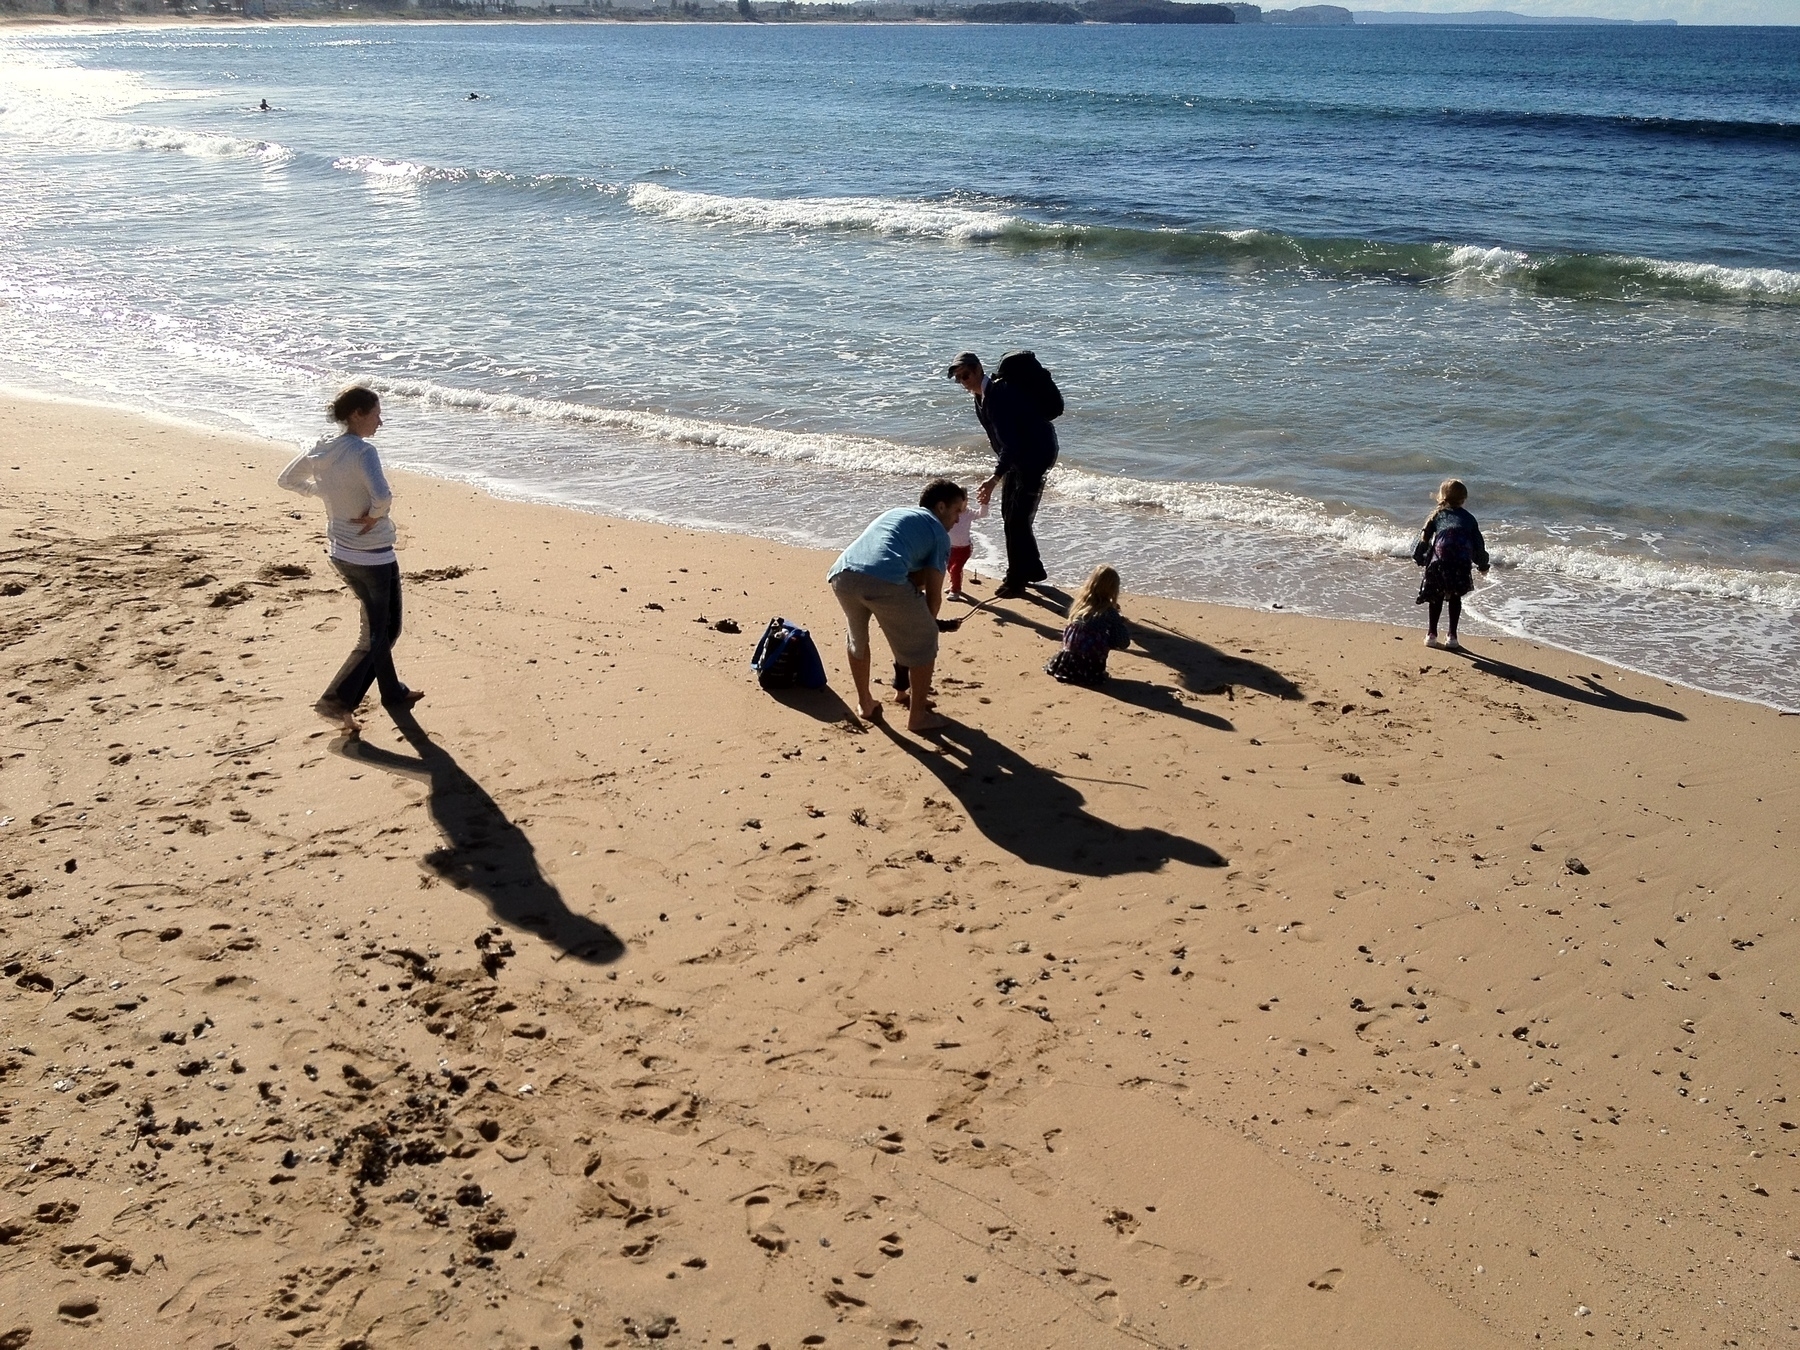 A group of adults and children cast long shadows as they fossick on a beach. Everyone is dressed for Winter, in jumpers and long trousers, except for a man in shorts and t-shirt who bends down to support a child, a blue backpack on the sand beside him. A second man, almost in silhouette at the water’s edge, fully dressed and carrying a backpack, leans forward holding the hand of a toddler in a pink top, red pants and trainers. The man’s heel is lifted, with water flowing beneath. Nearby are two small girls with long blonde hair. They’re dressed alike, and may be twins. One crouches down on the sand, hair loose, and the other stands facing the sea with her toes almost touching the waves. She wears a jacket with long sleeves, a knee-length dress, dark tights and white trainers. Her hair is in a plait. One arm lifts slightly, as if she wants to reach out. A woman walks down the sand towards the group, hair up, hands on hips. She wears long pants and a white hoody, but her feet are bare.